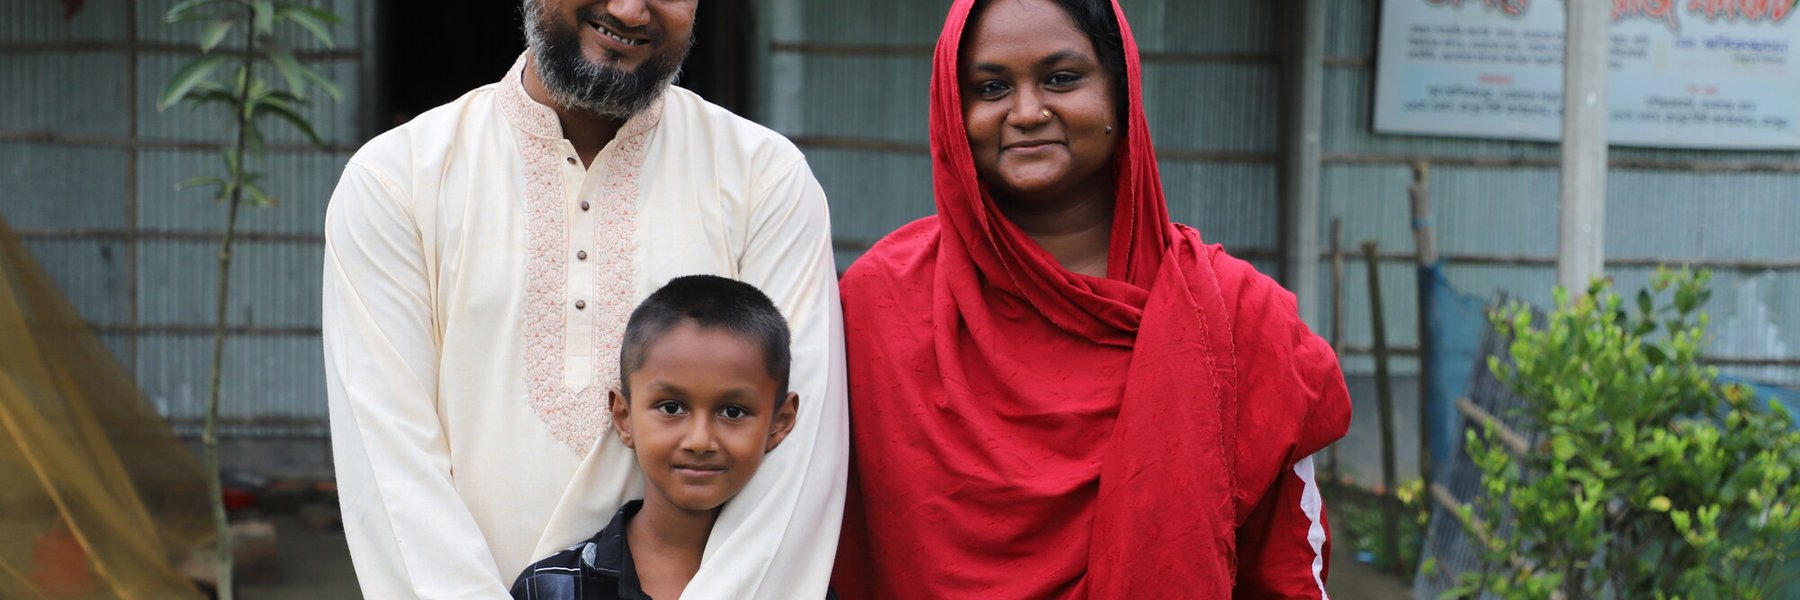 Nujhat (29) and husband Zakir (35) stand outside their rug-making business in Bangladesh with their son Talha.